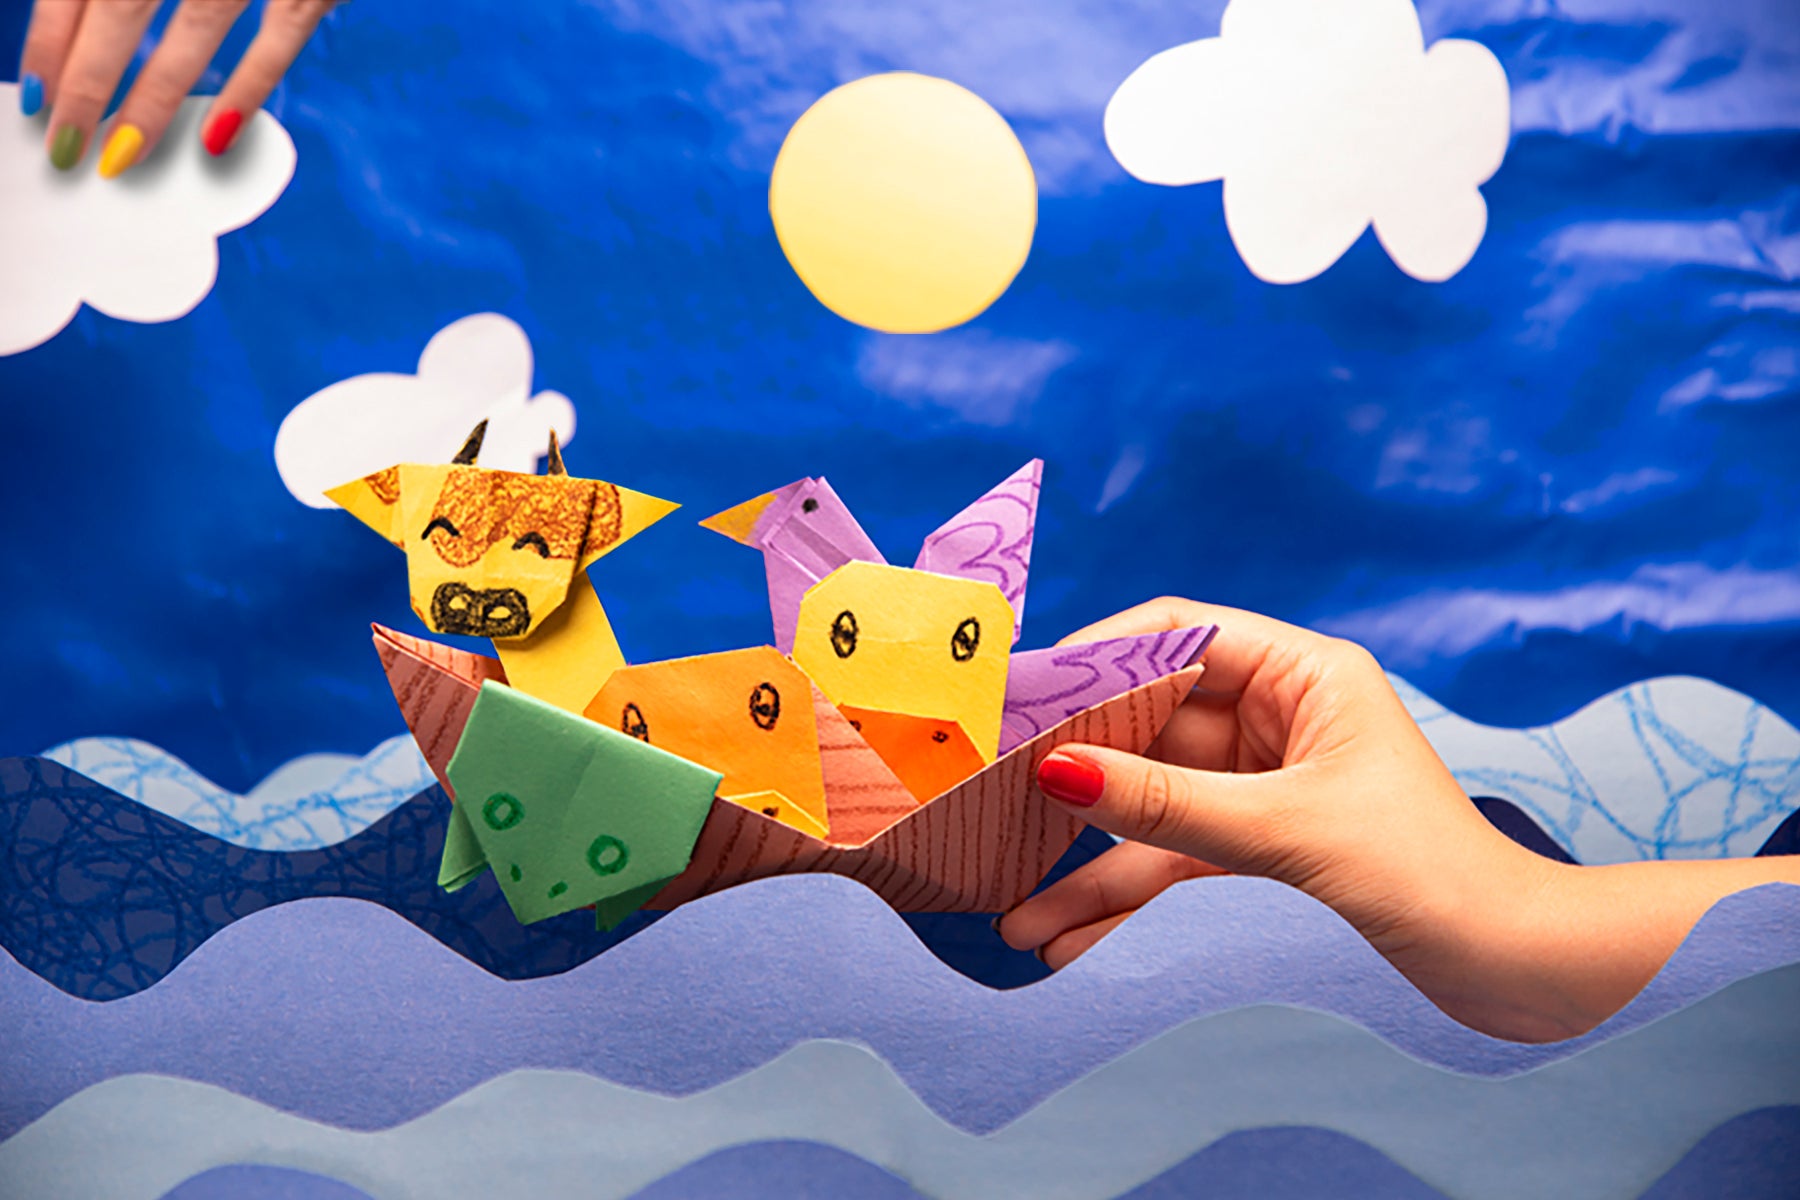 Origami Noah's arc in fun scene of ocean and sky made with blue construction paper